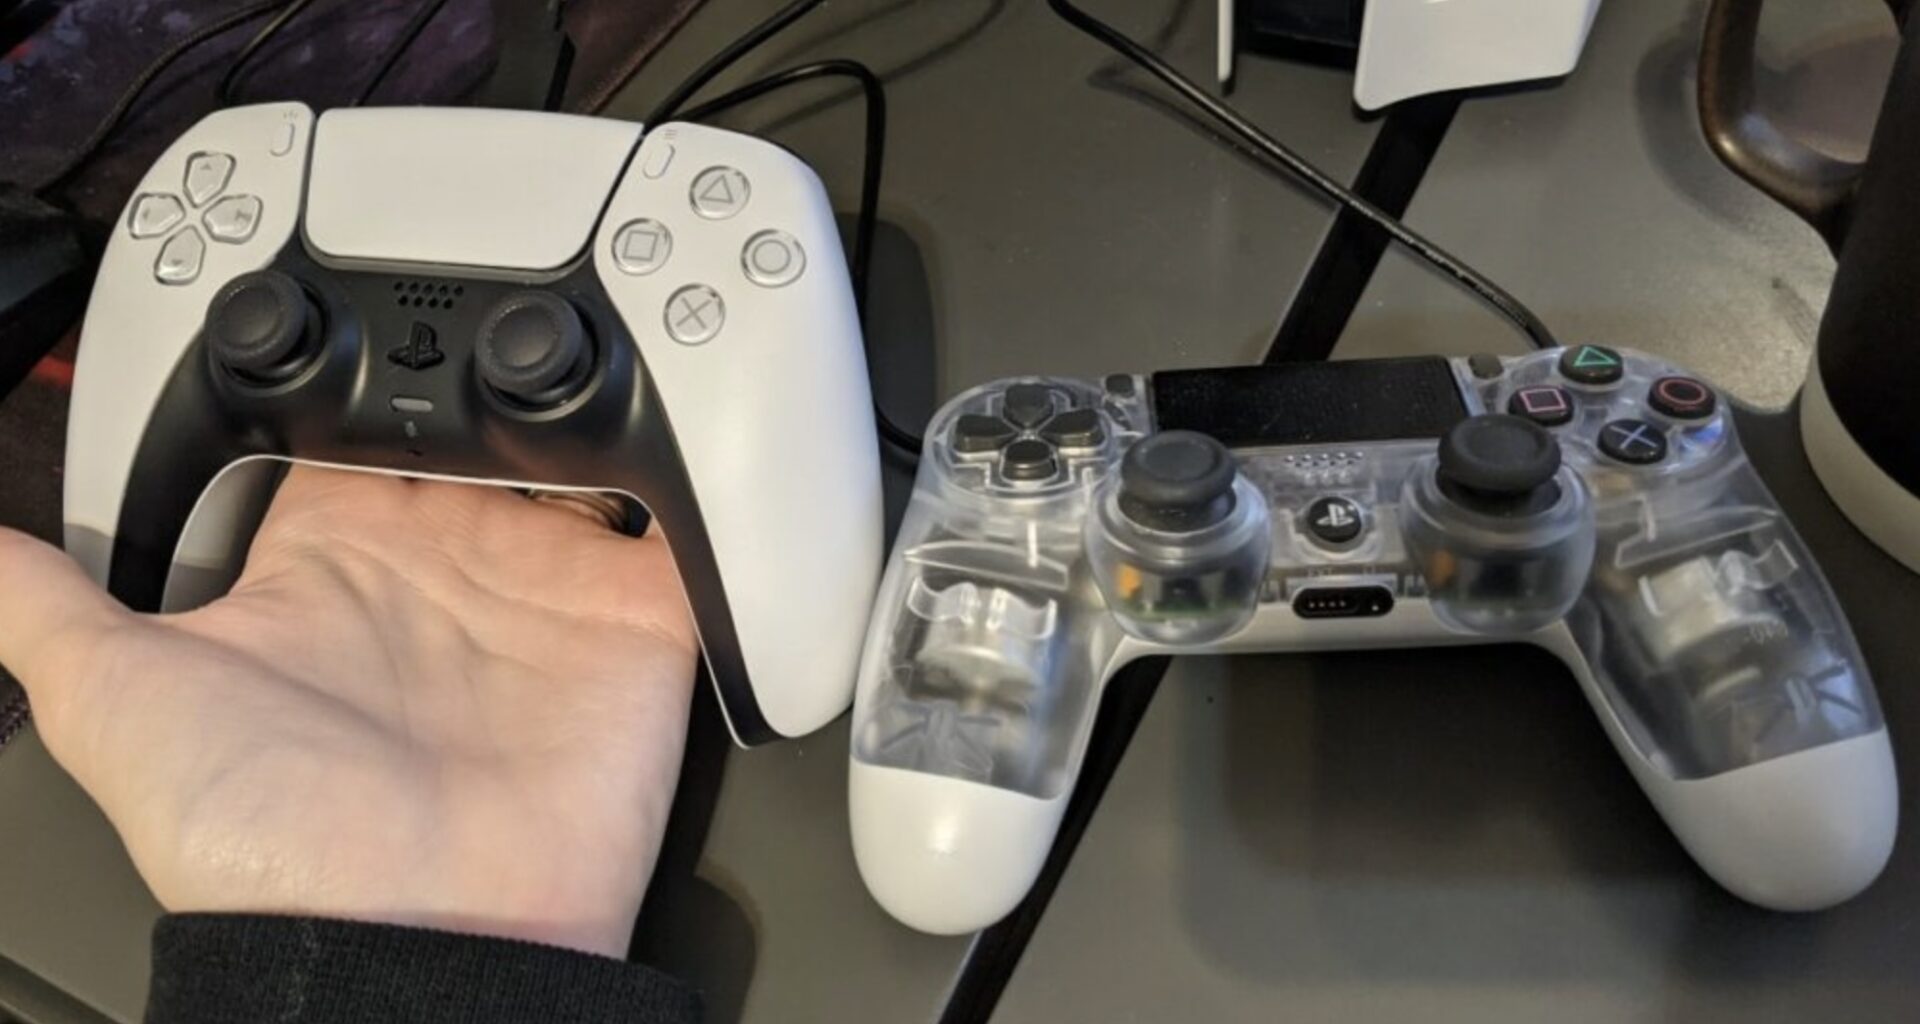 How To Update PS5 Controller